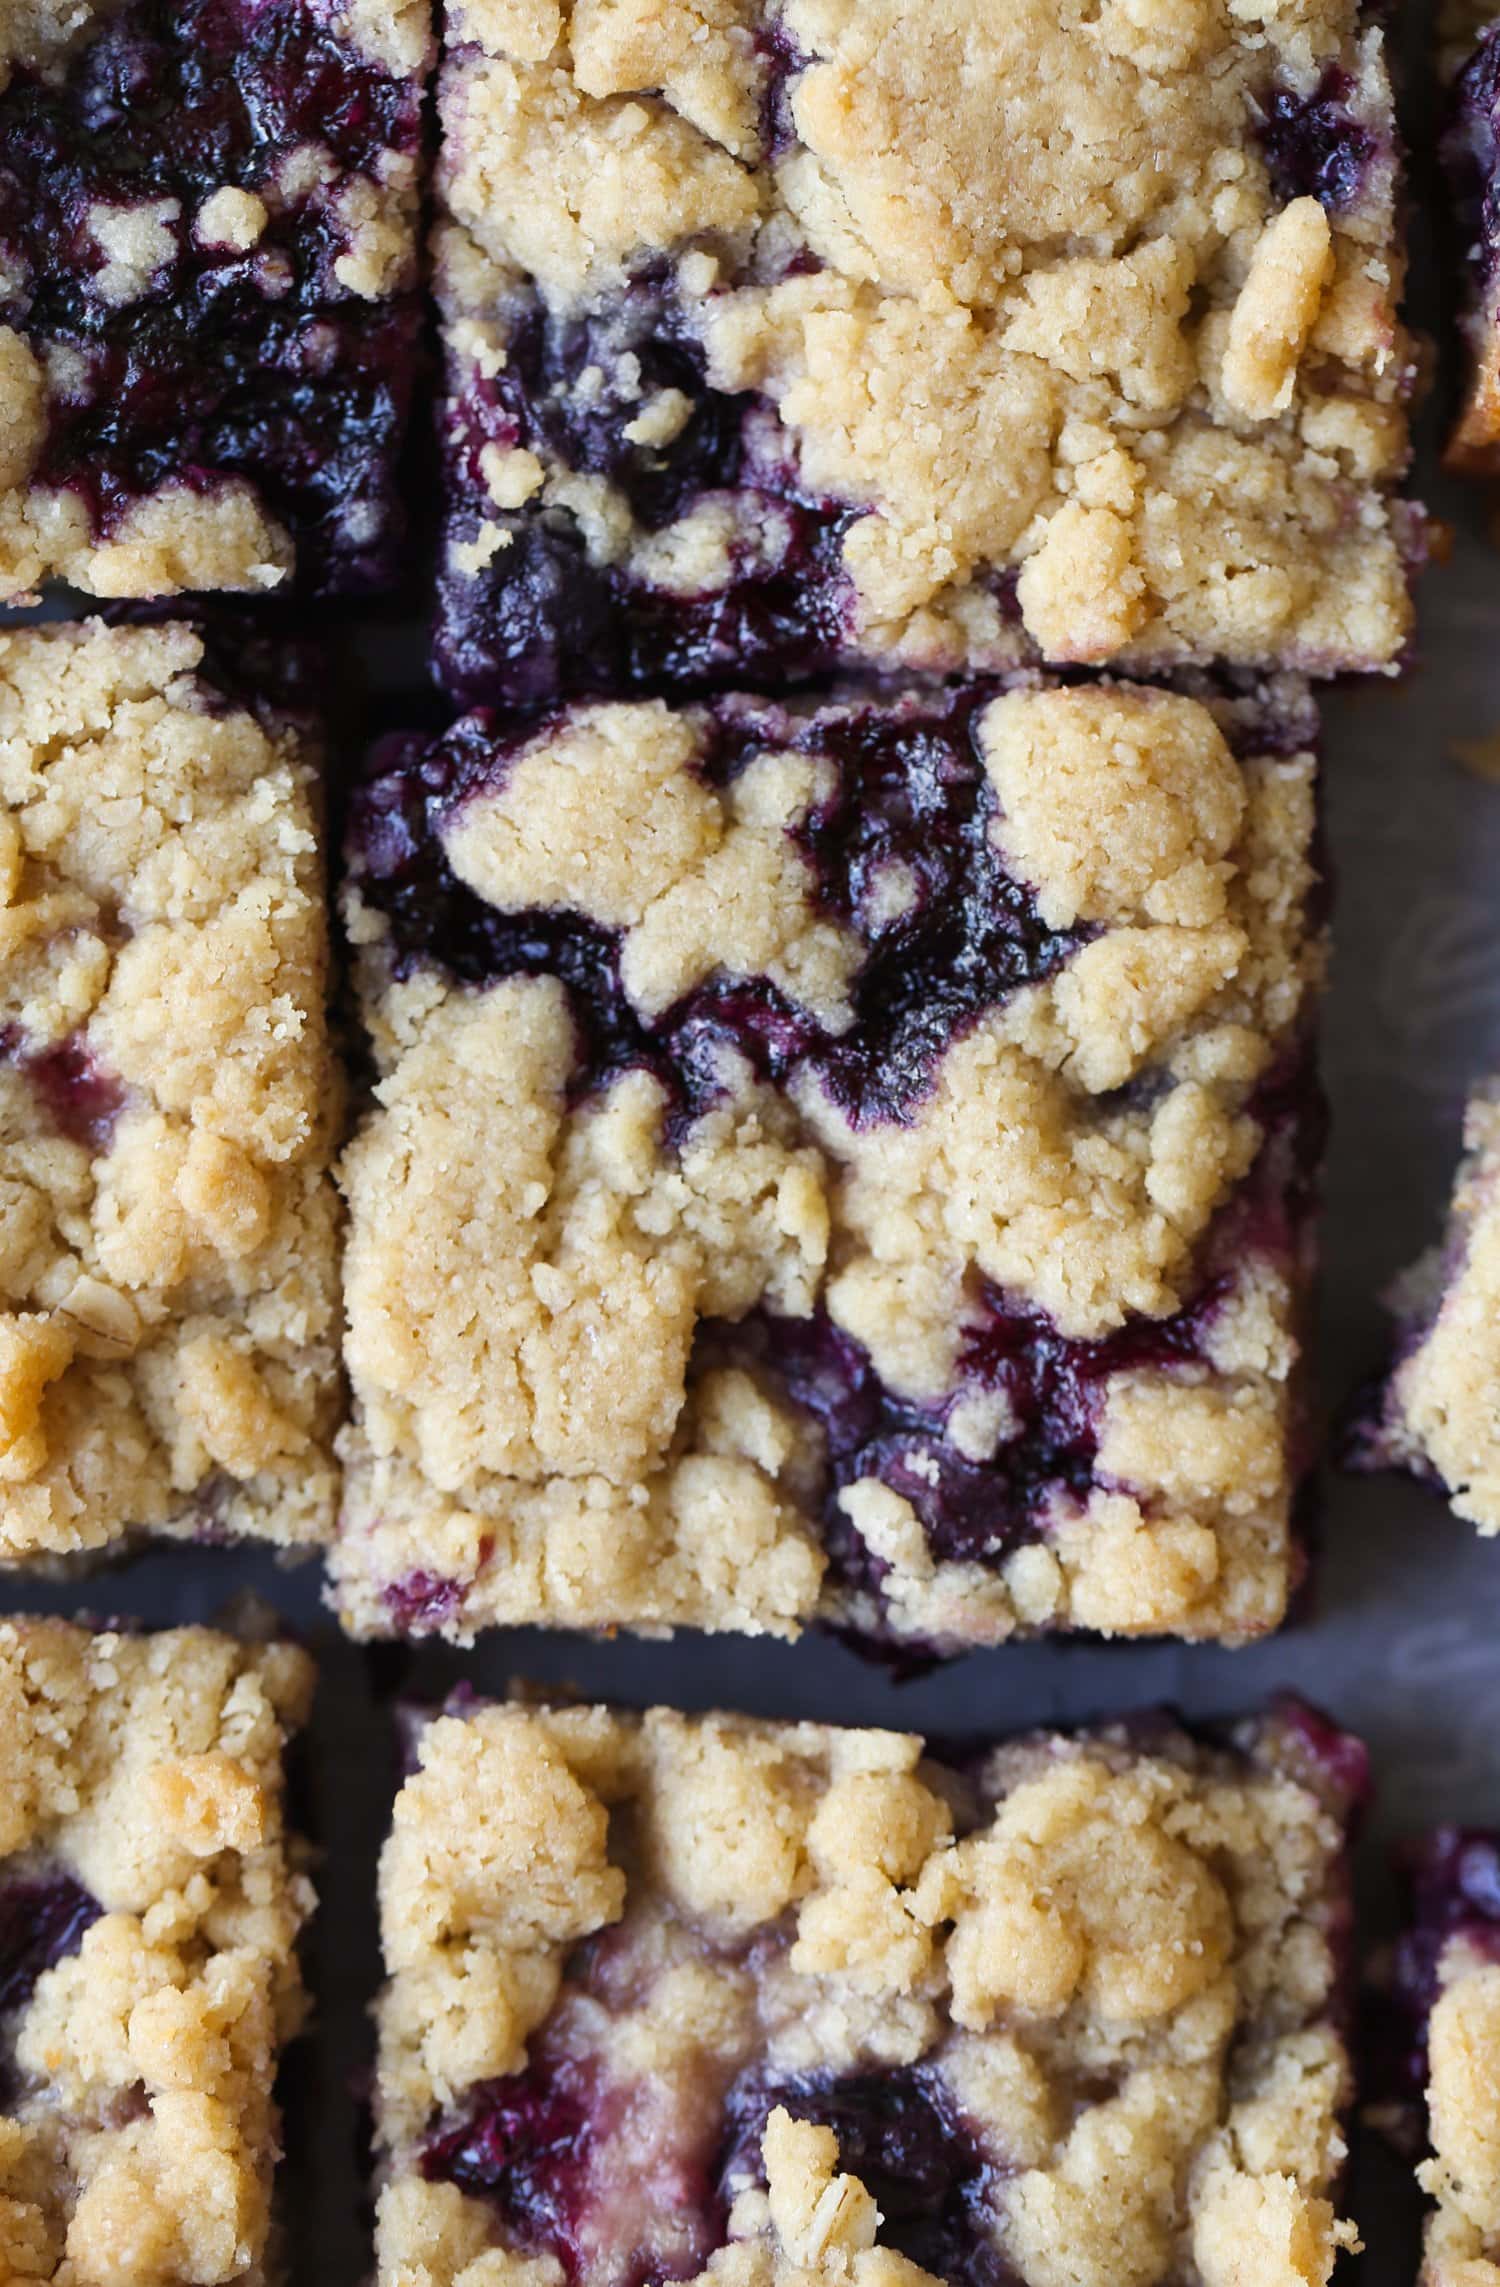 Streusel topping on blueberry bars close-up